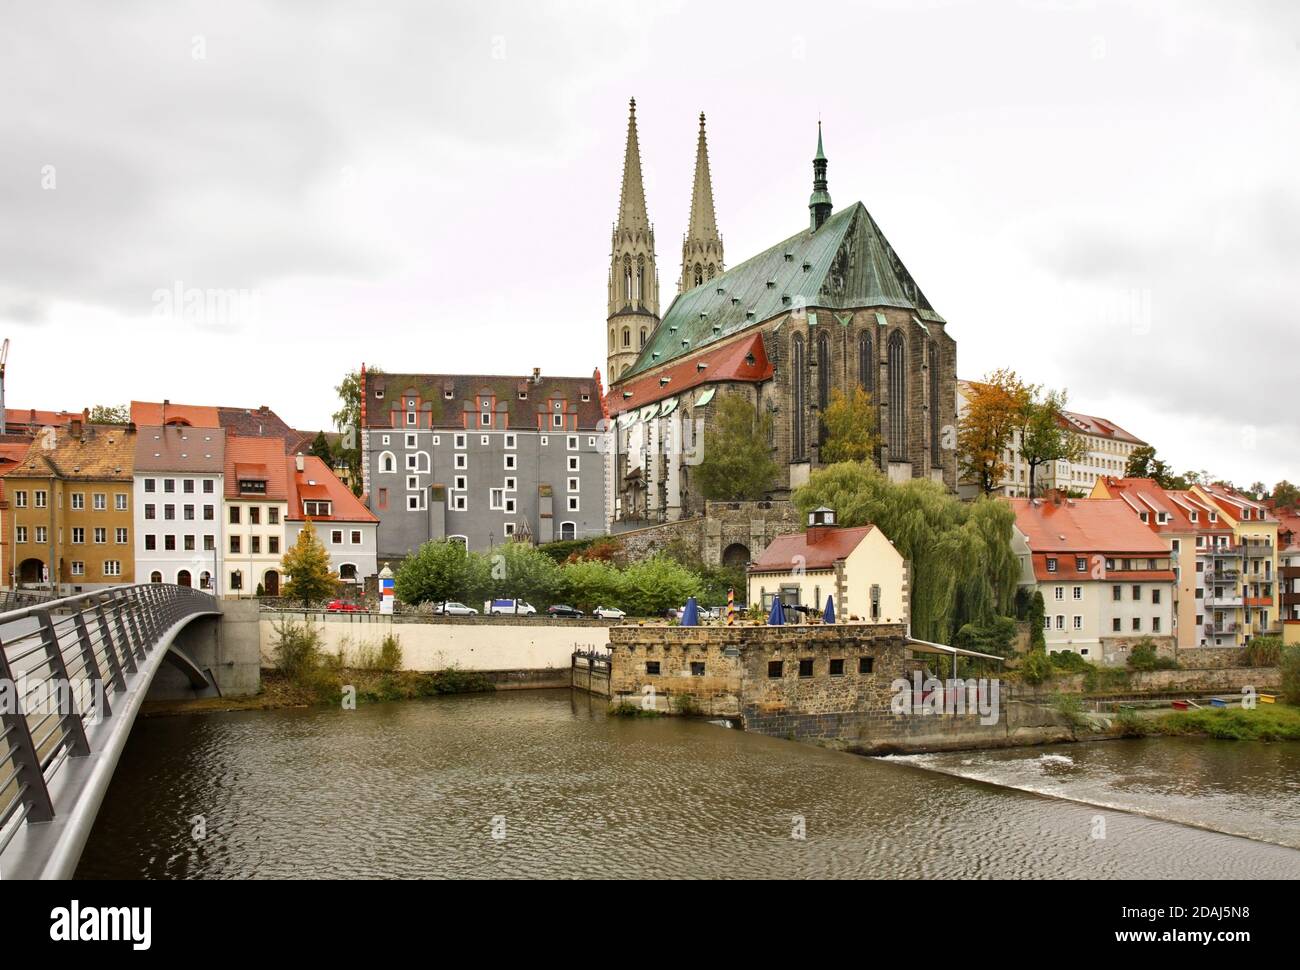 St. Peter and Paul church in Gorlitz. Germany Stock Photo